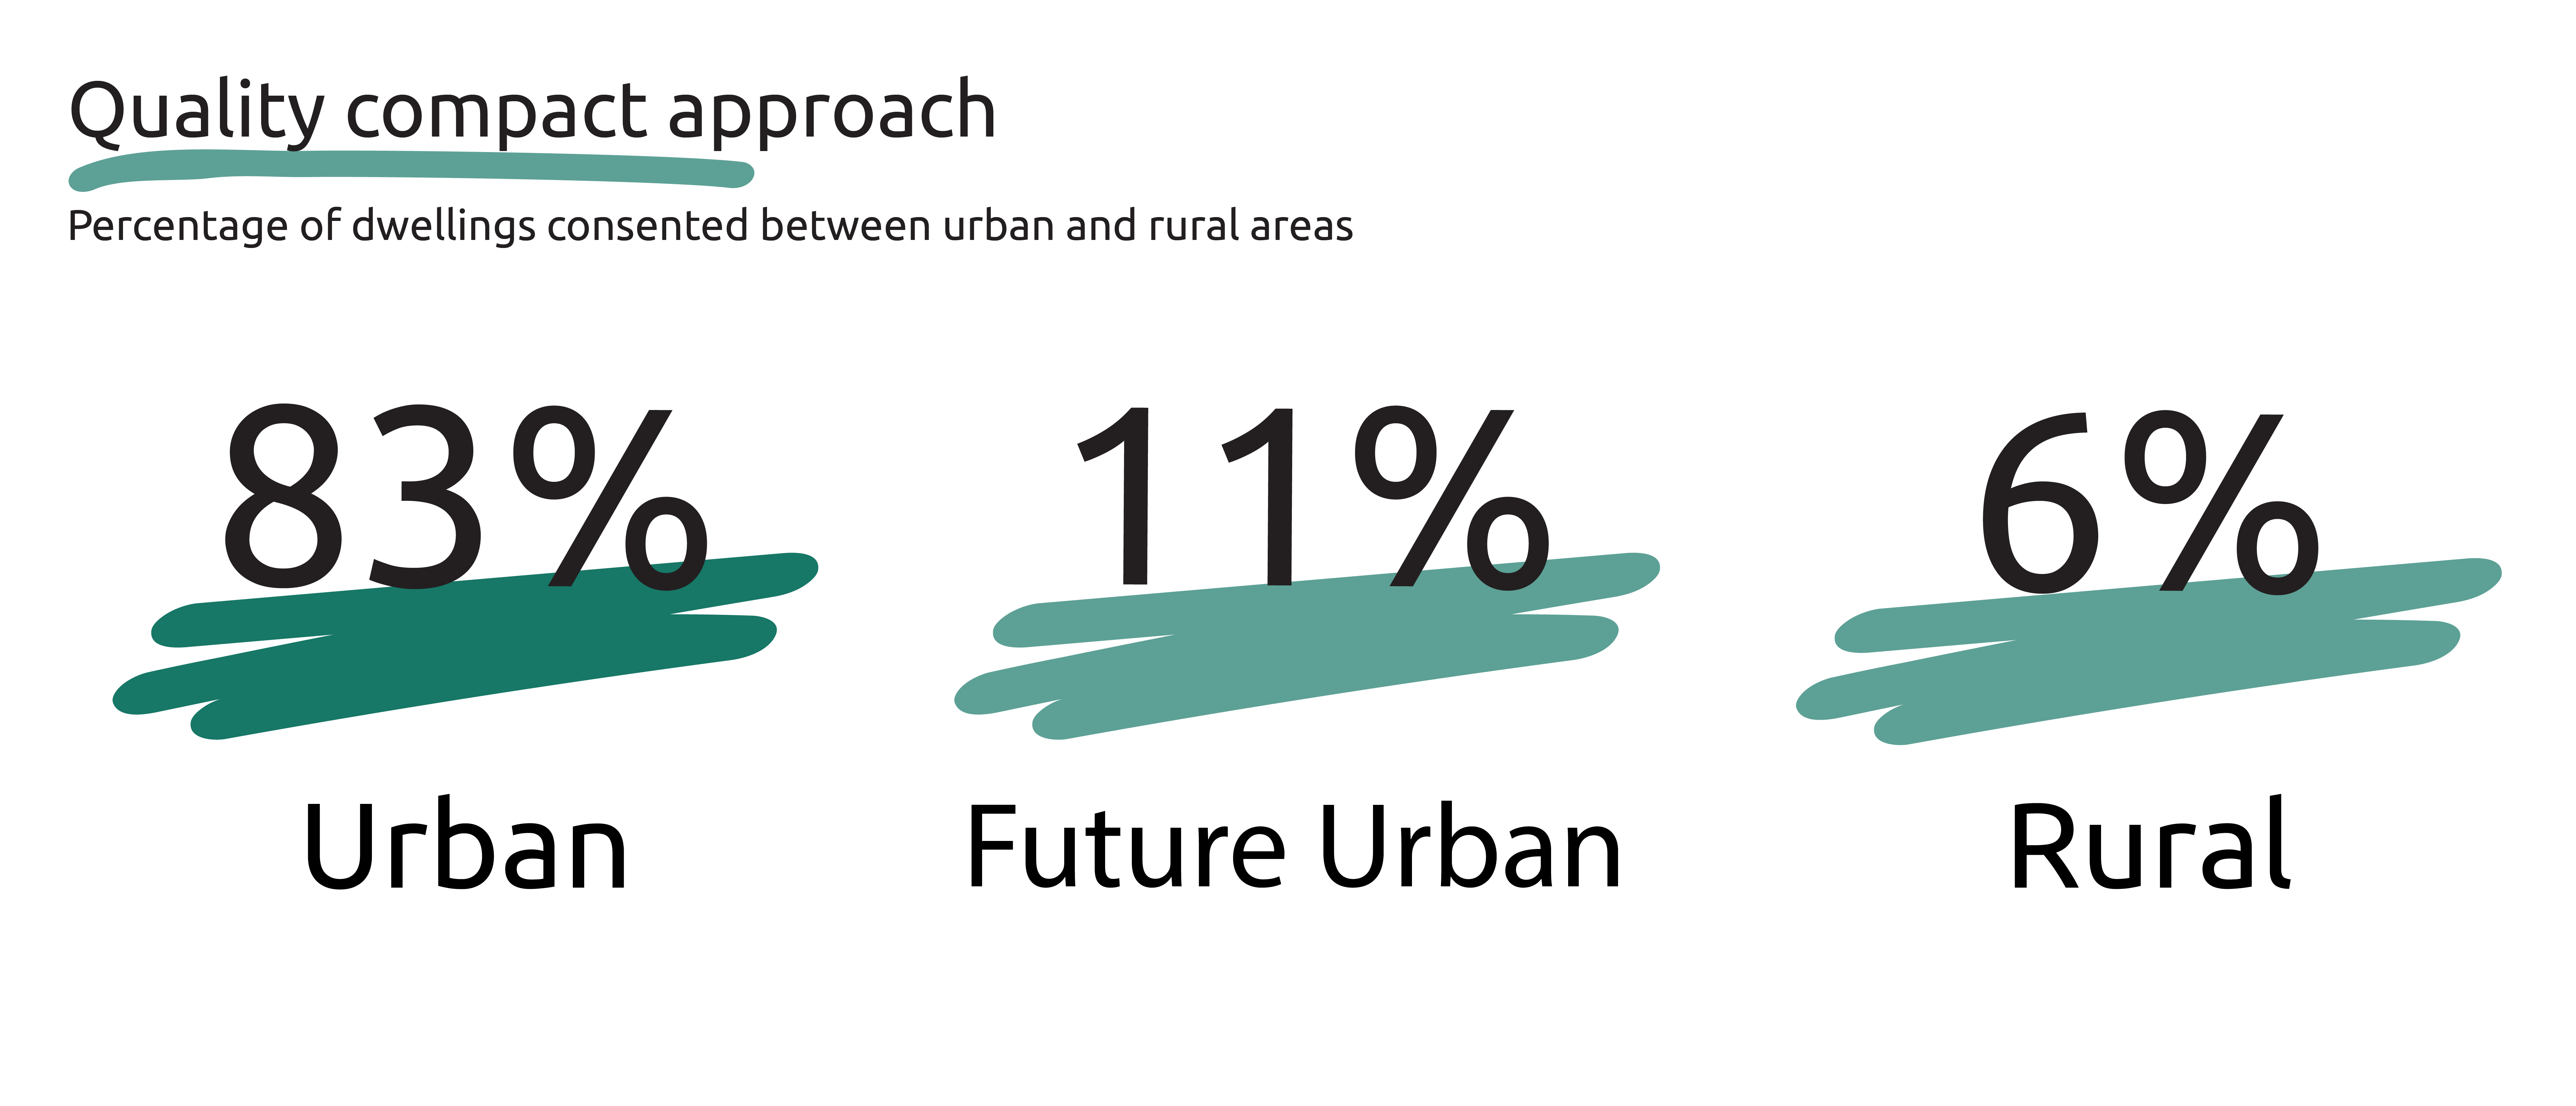 Percentage of dwellings consented between urban and rural areas in 2021/2022.